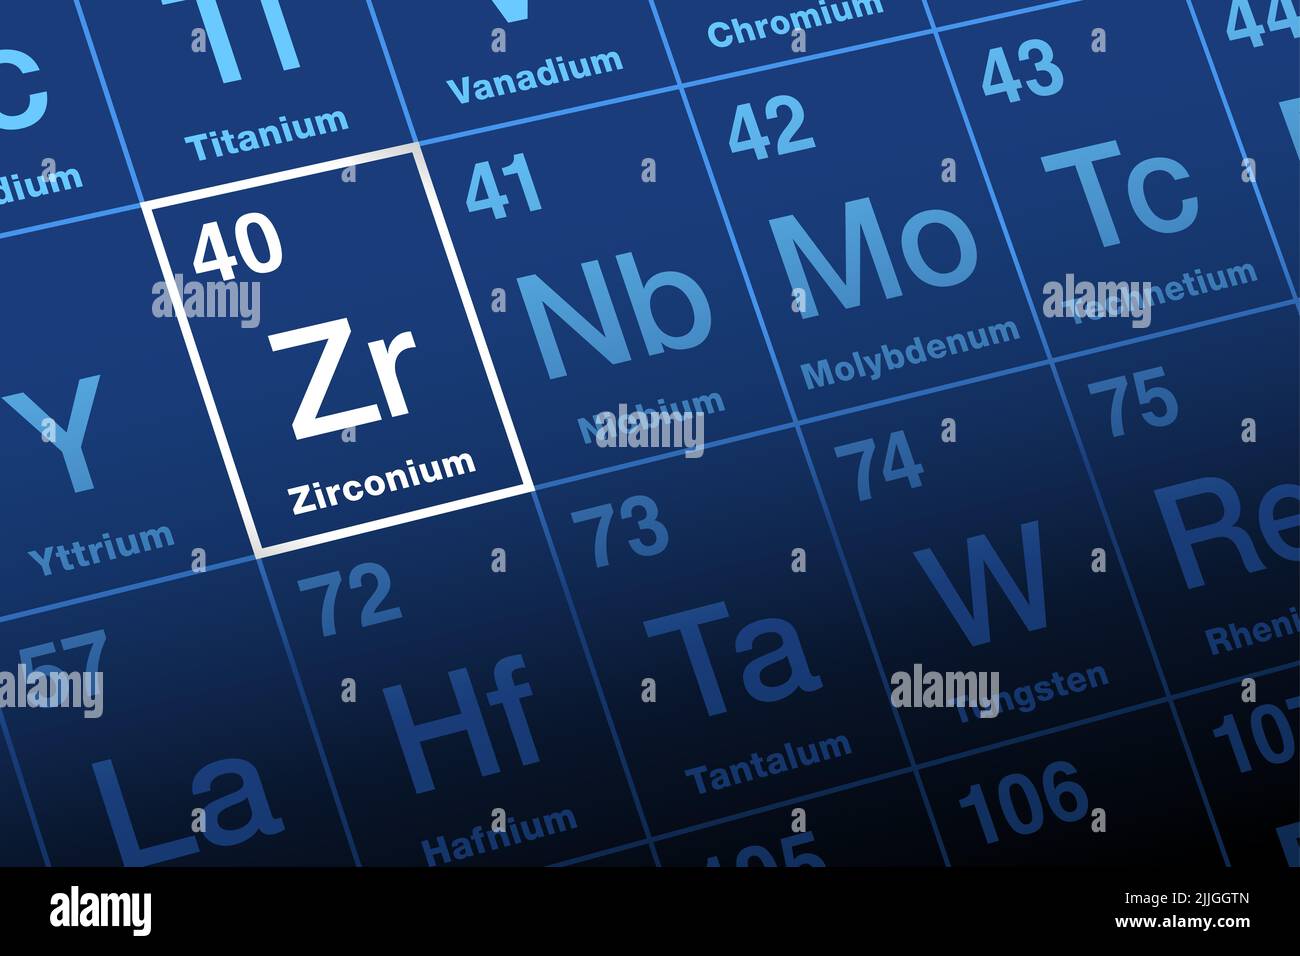 Zirconium on periodic table. Transition metal and element, with symbol Zr from the mineral zircon, related to Persian zargun for gold-like. Stock Photo